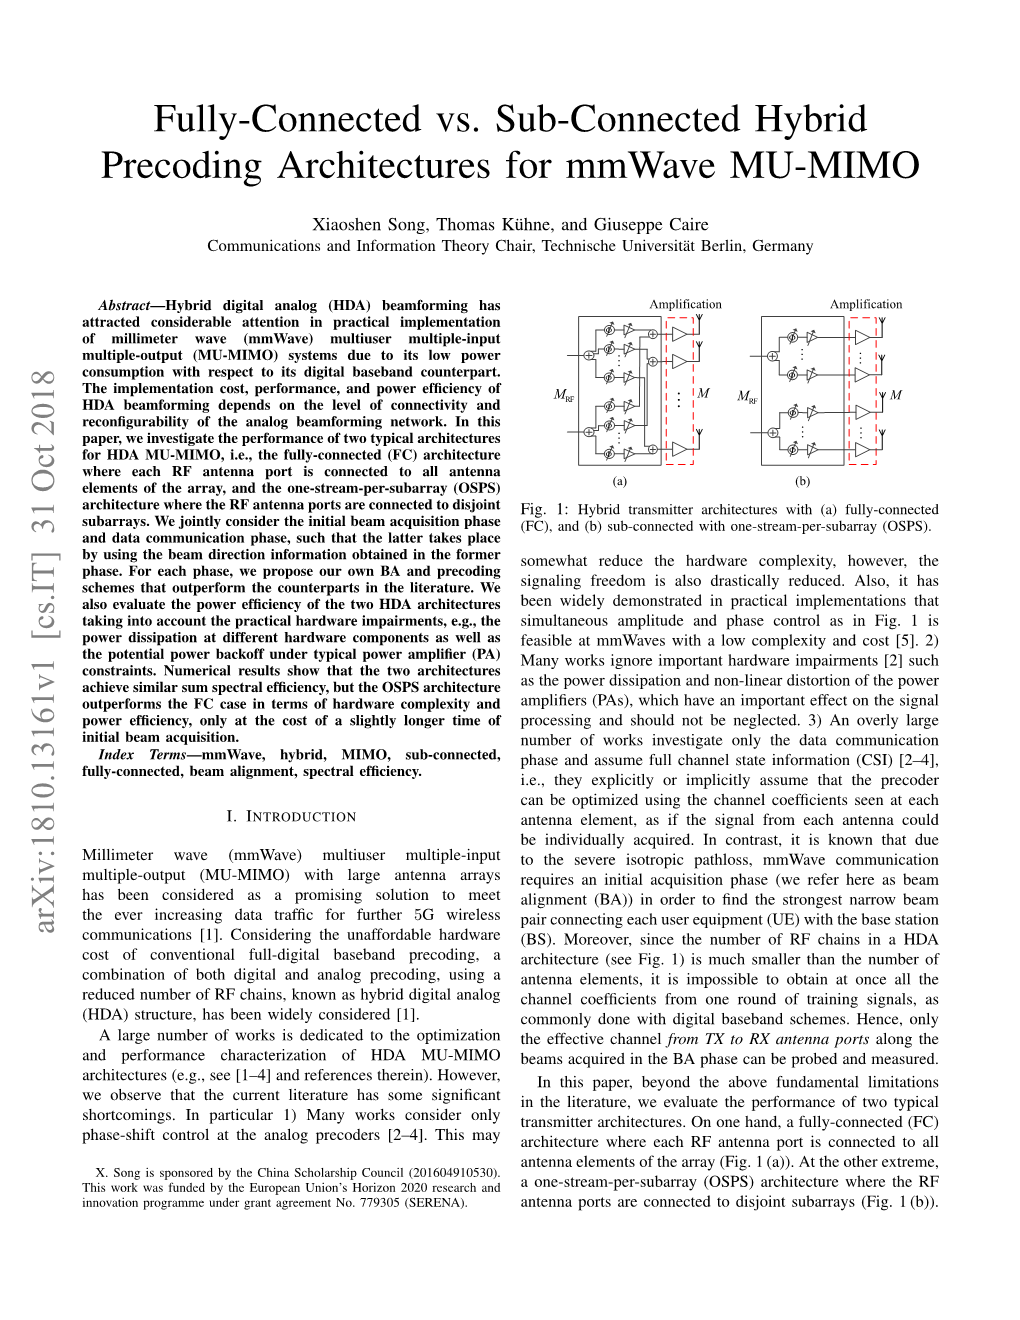 Fully-Connected Vs. Sub-Connected Hybrid Precoding Architectures for Mmwave MU-MIMO